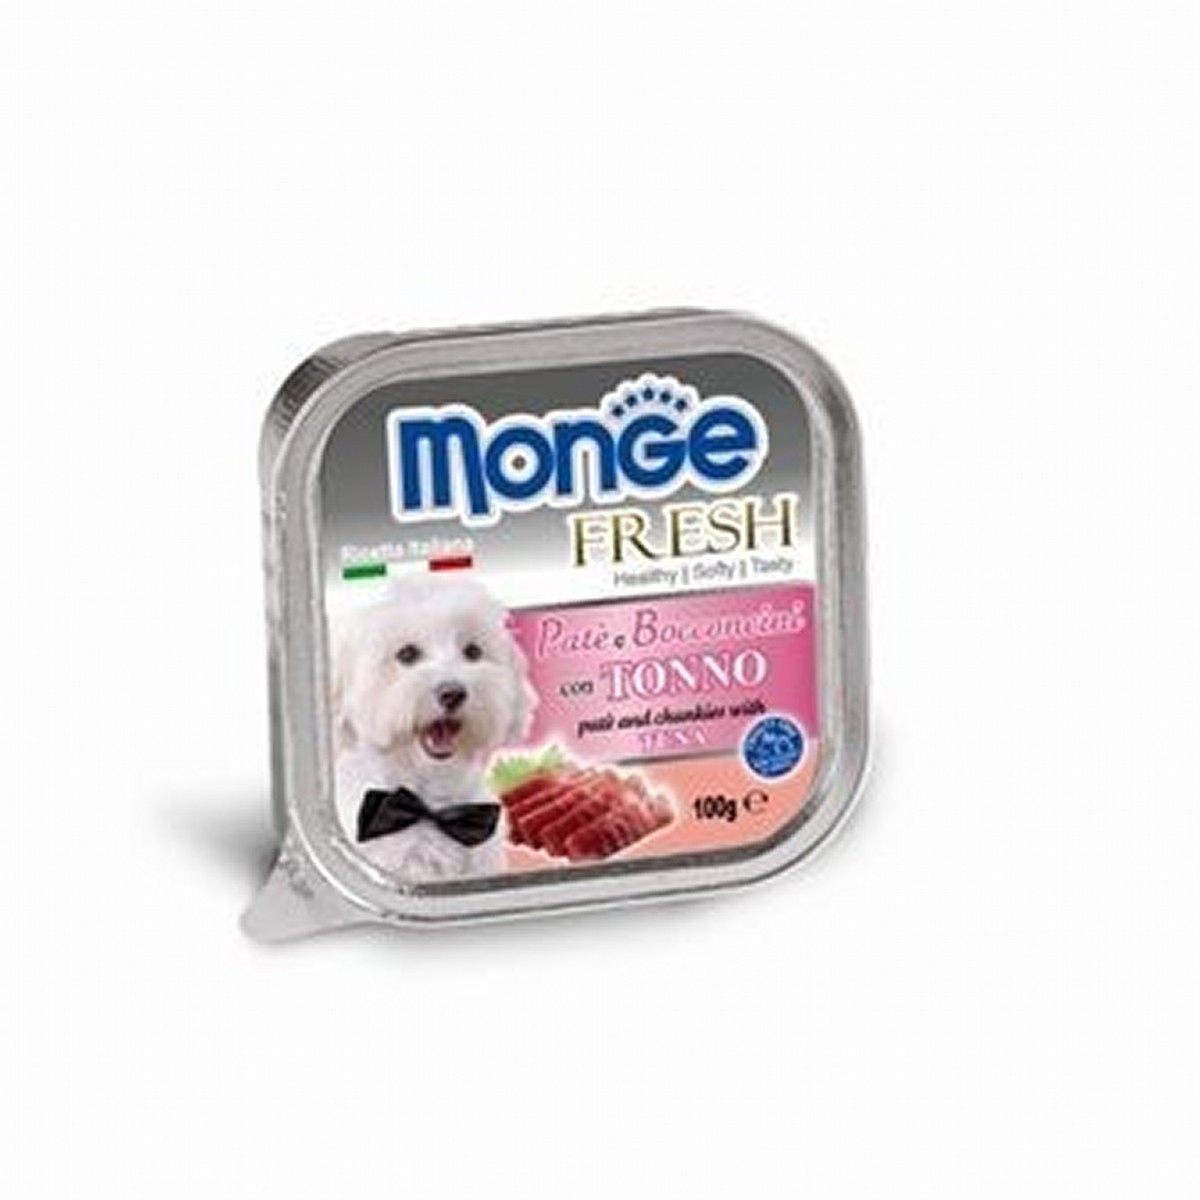 Monge Fresh pate with pieces of tuna 100g